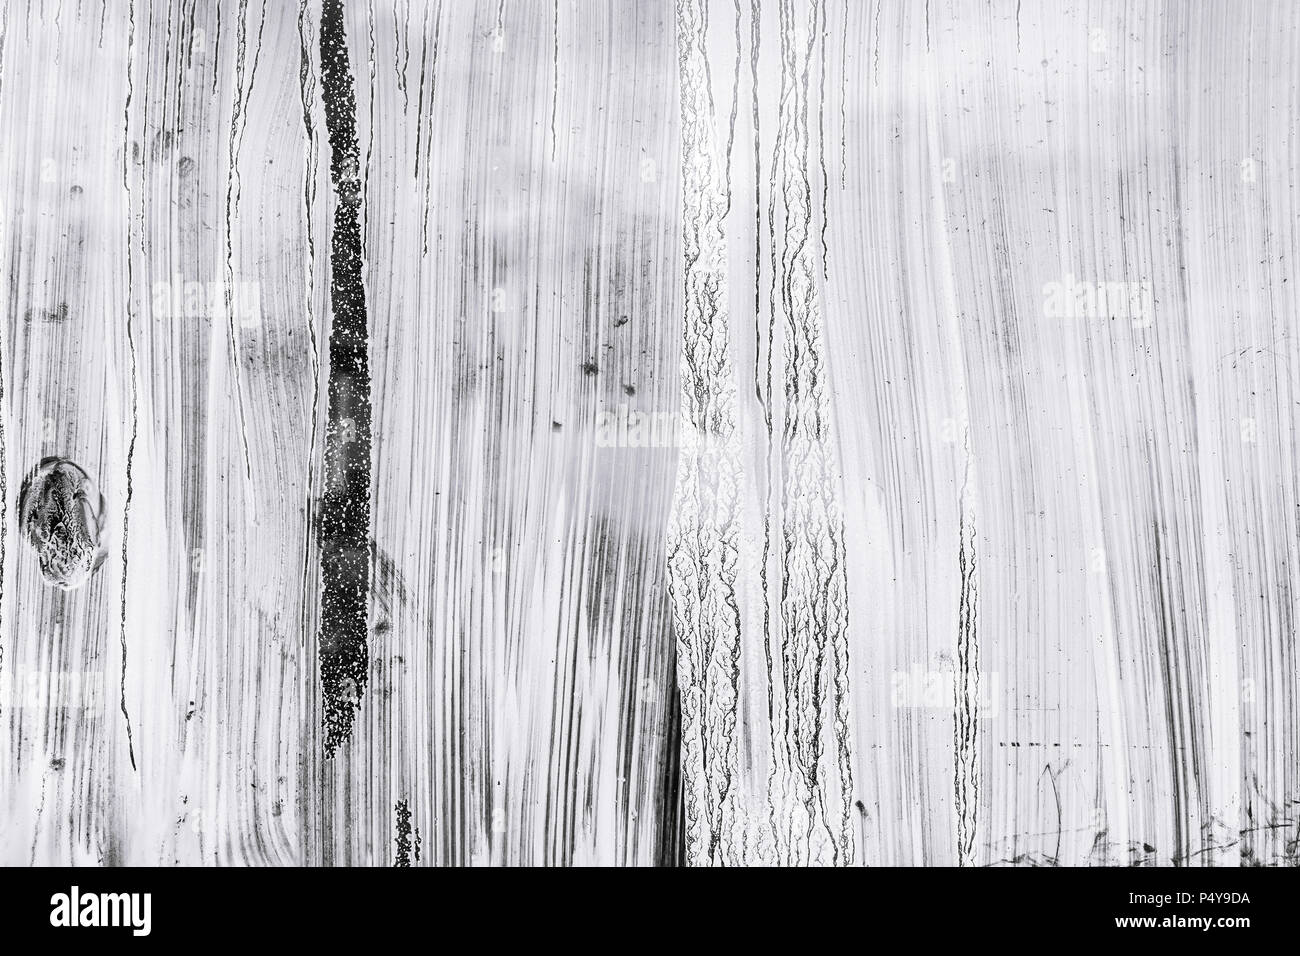 abstract hand painted glass surface background. whitewash paint blots on greenhouse windows Stock Photo